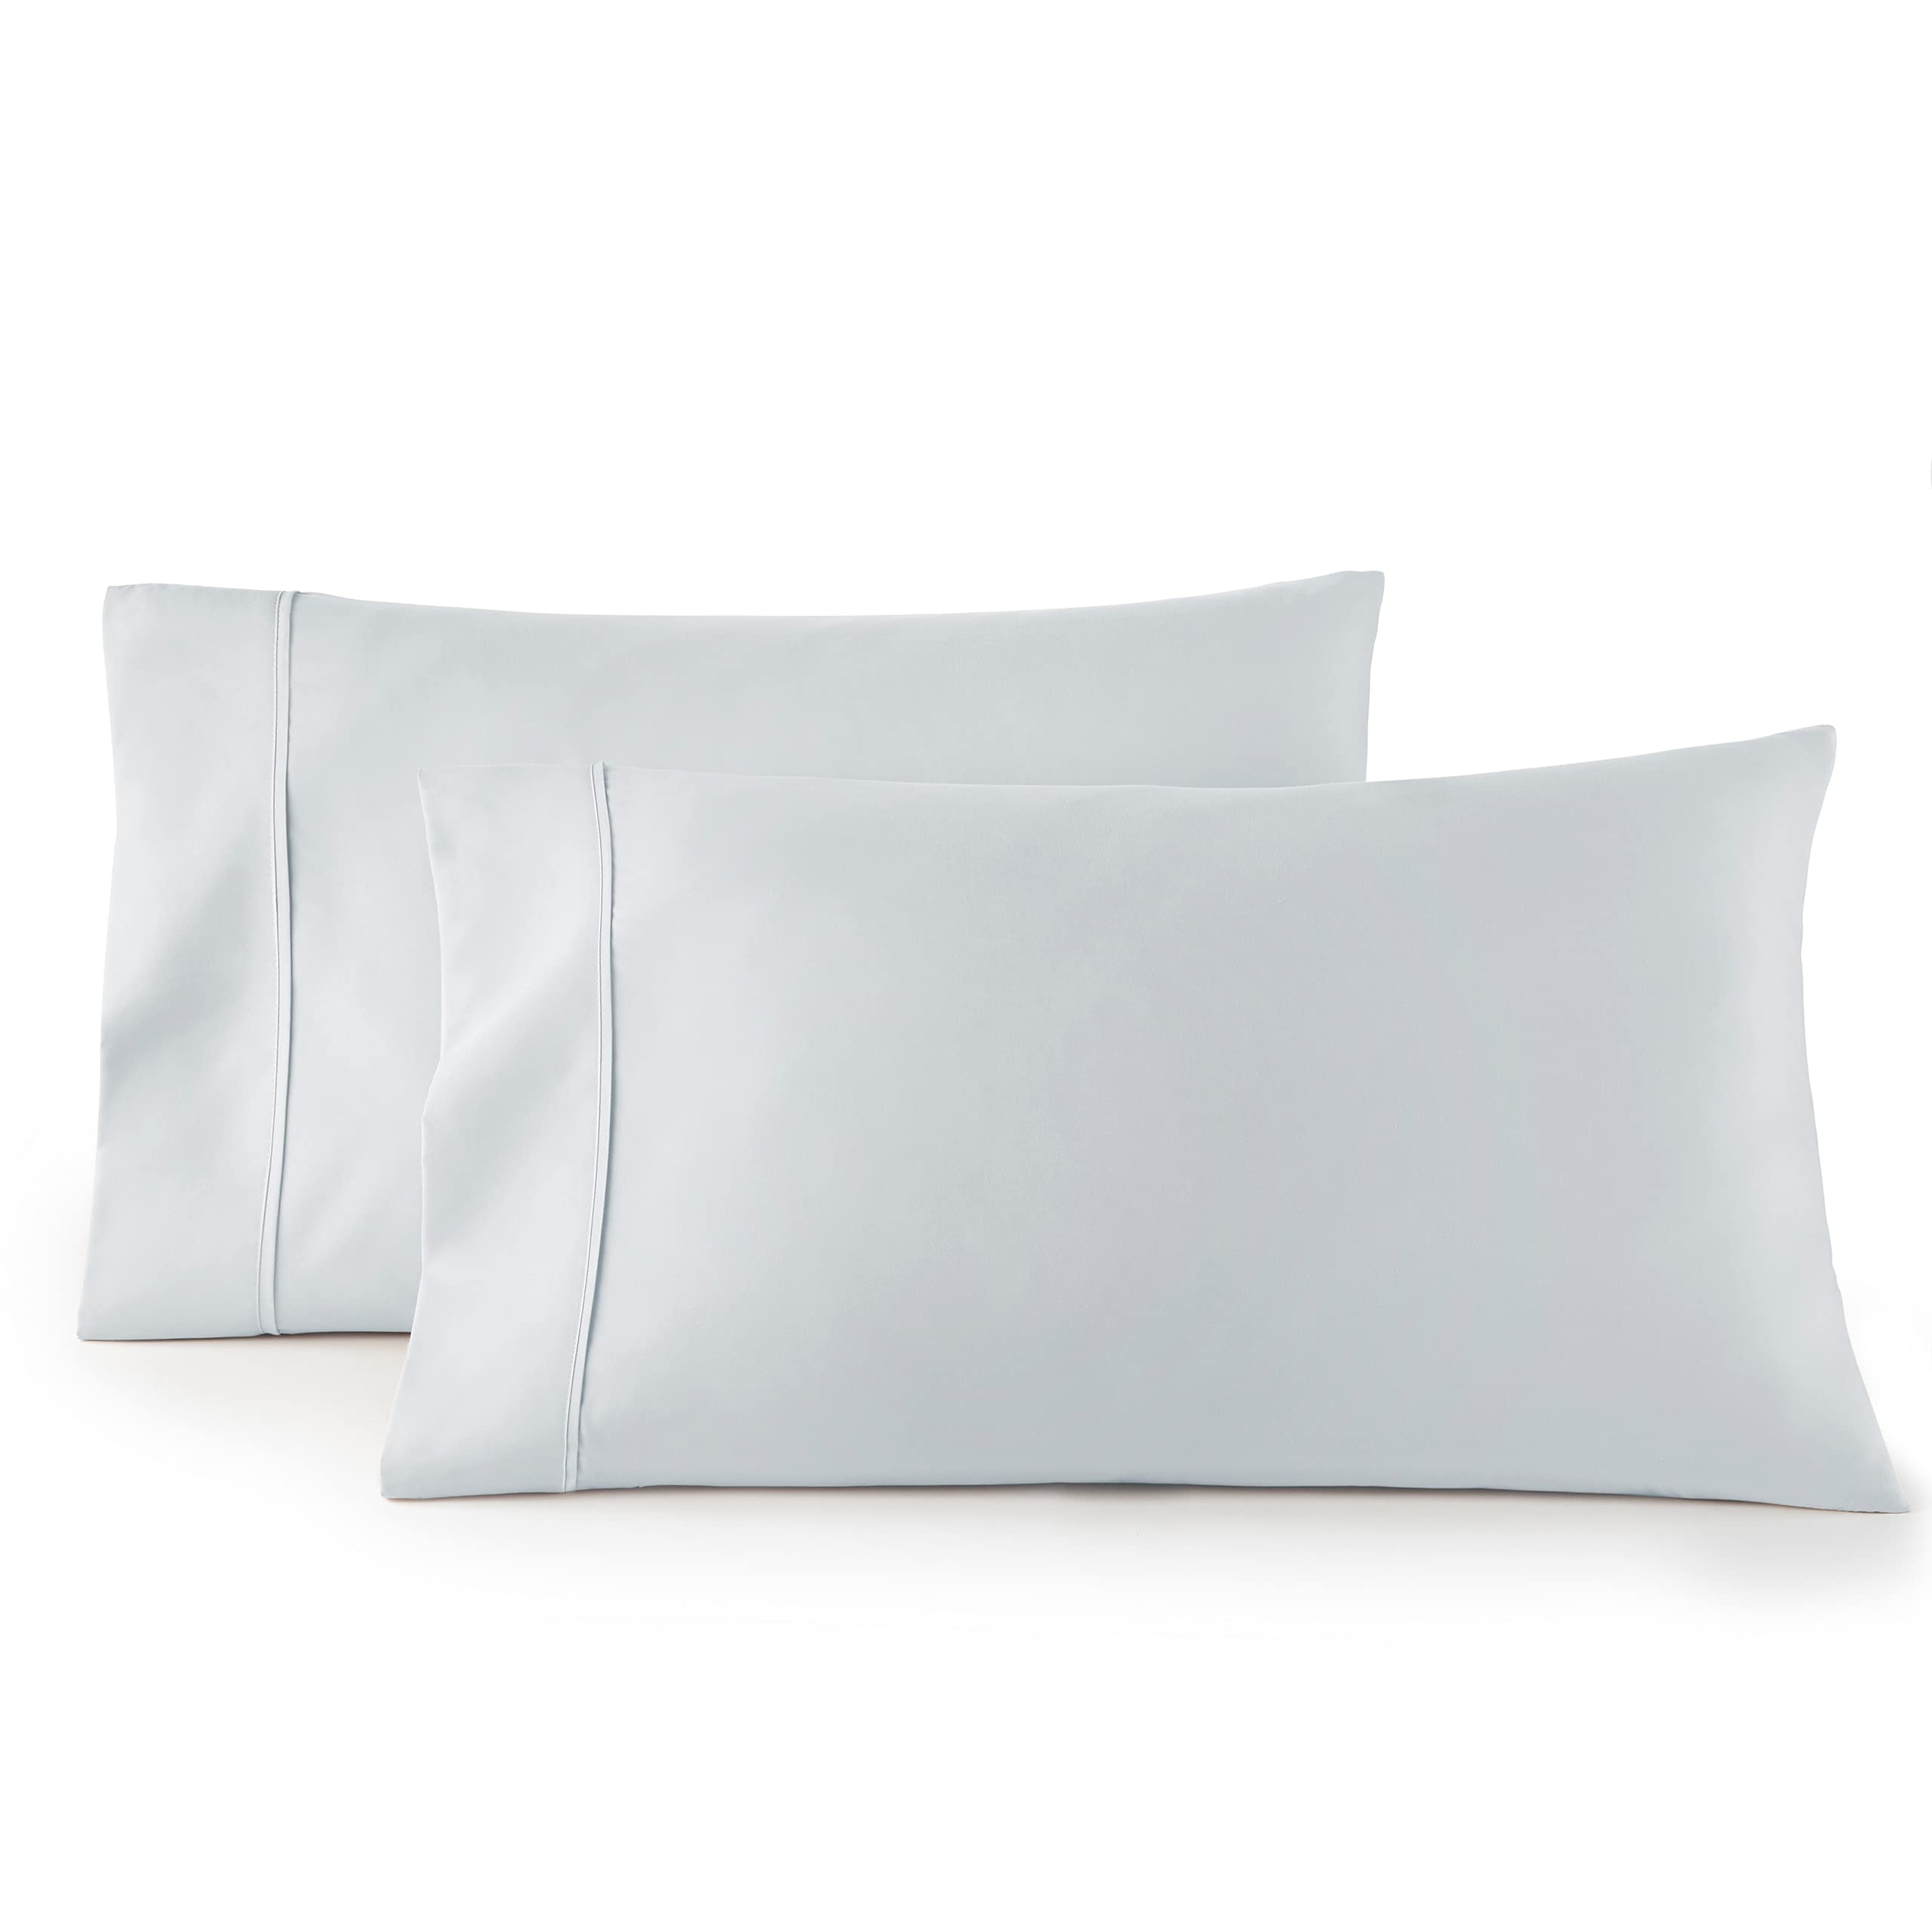 Book Cover HC COLLECTION Pillow Cases - Set of 2 King Size Pillowcases, 20